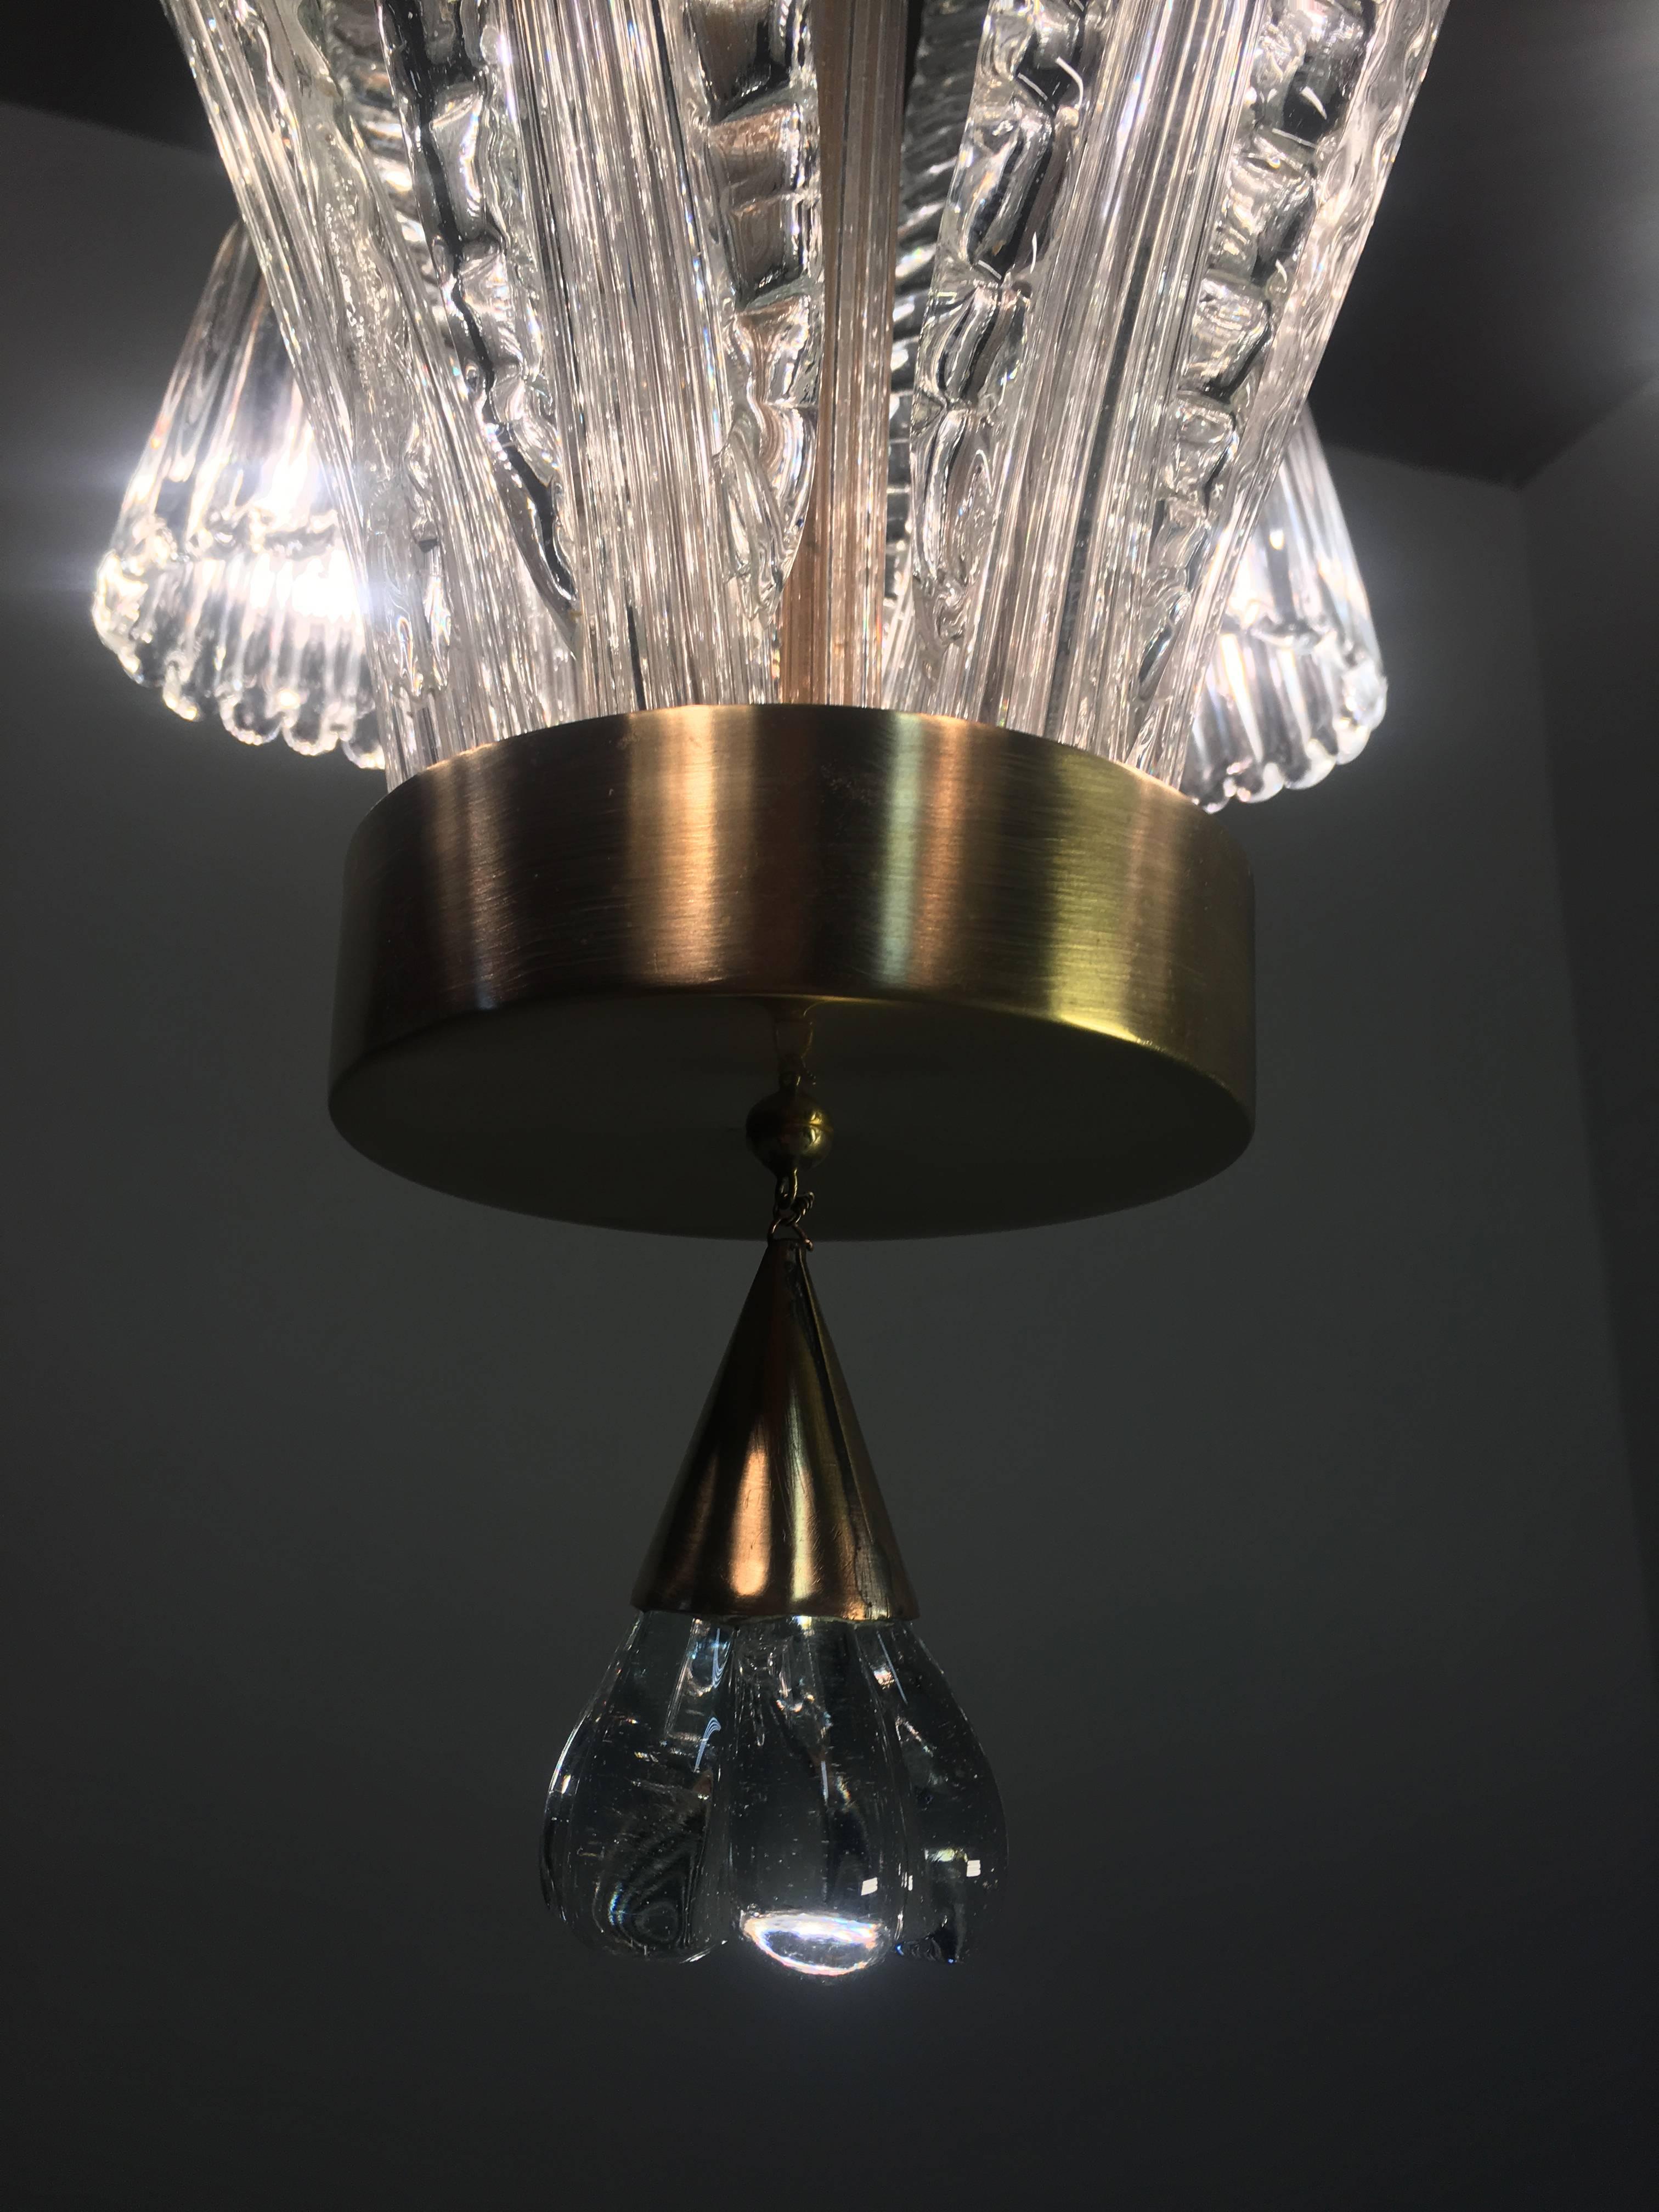 Charming Art Deco Chandelier by Ercole Barovier, Murano, 1940s For Sale 10